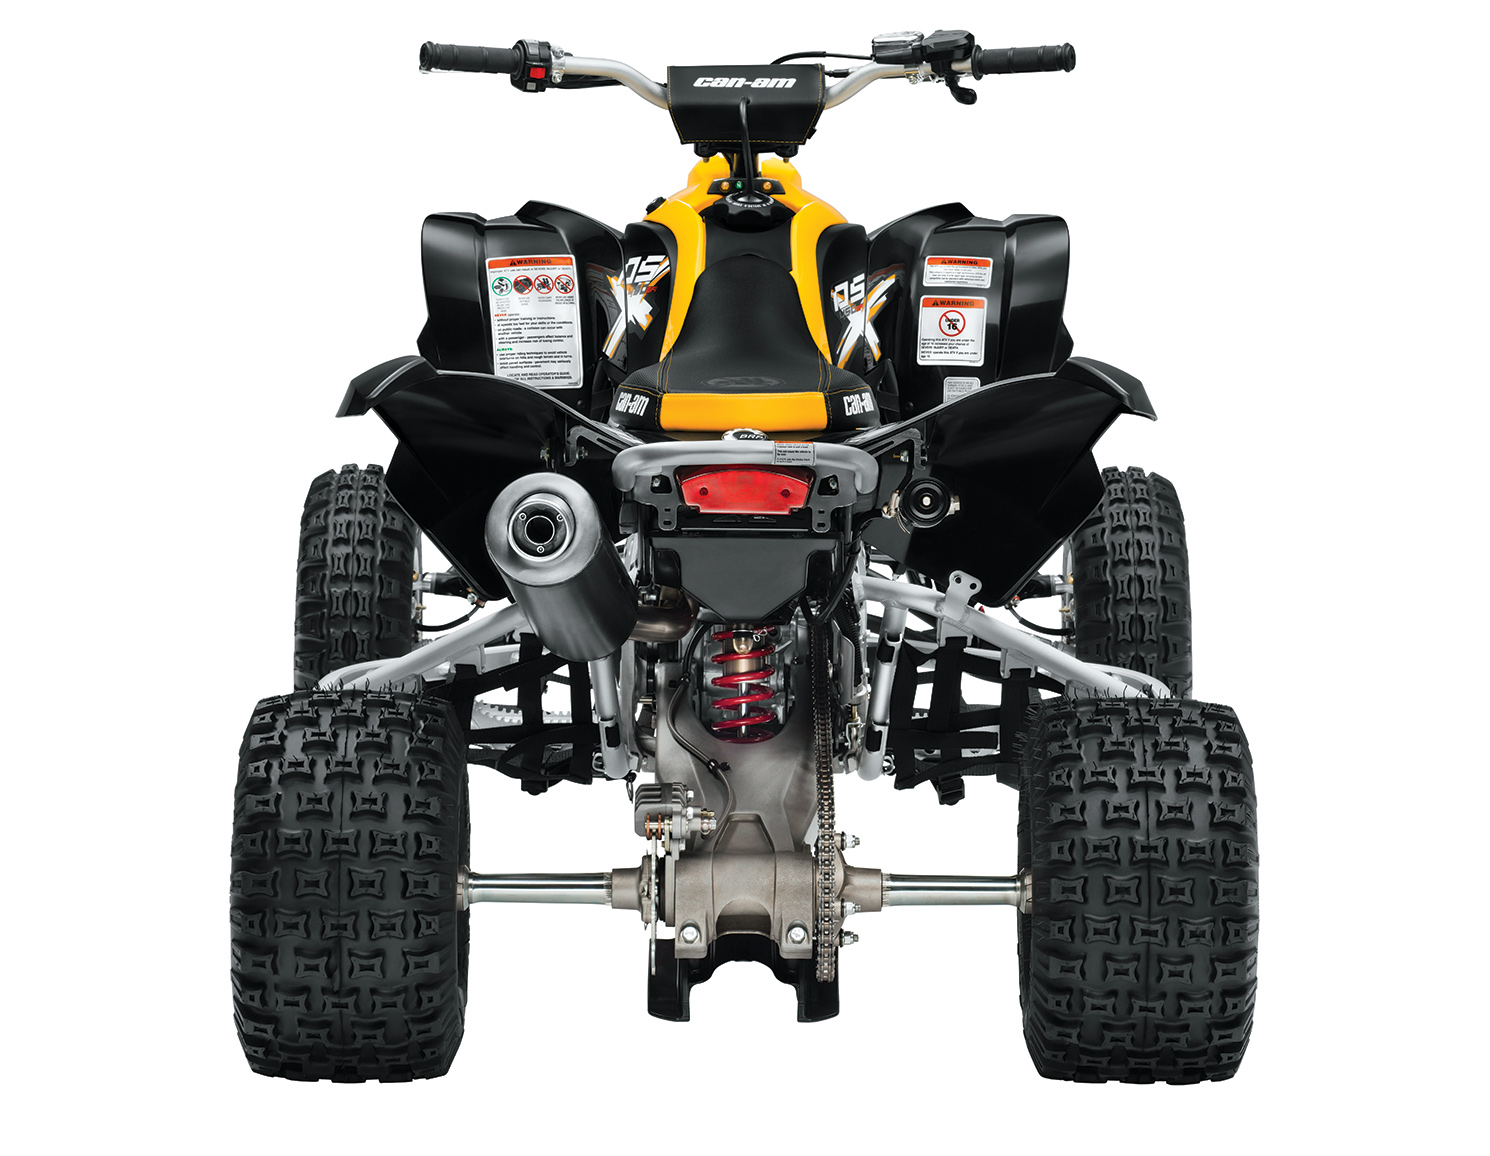  CAN-AM DS 450 XMX v 2014  3 